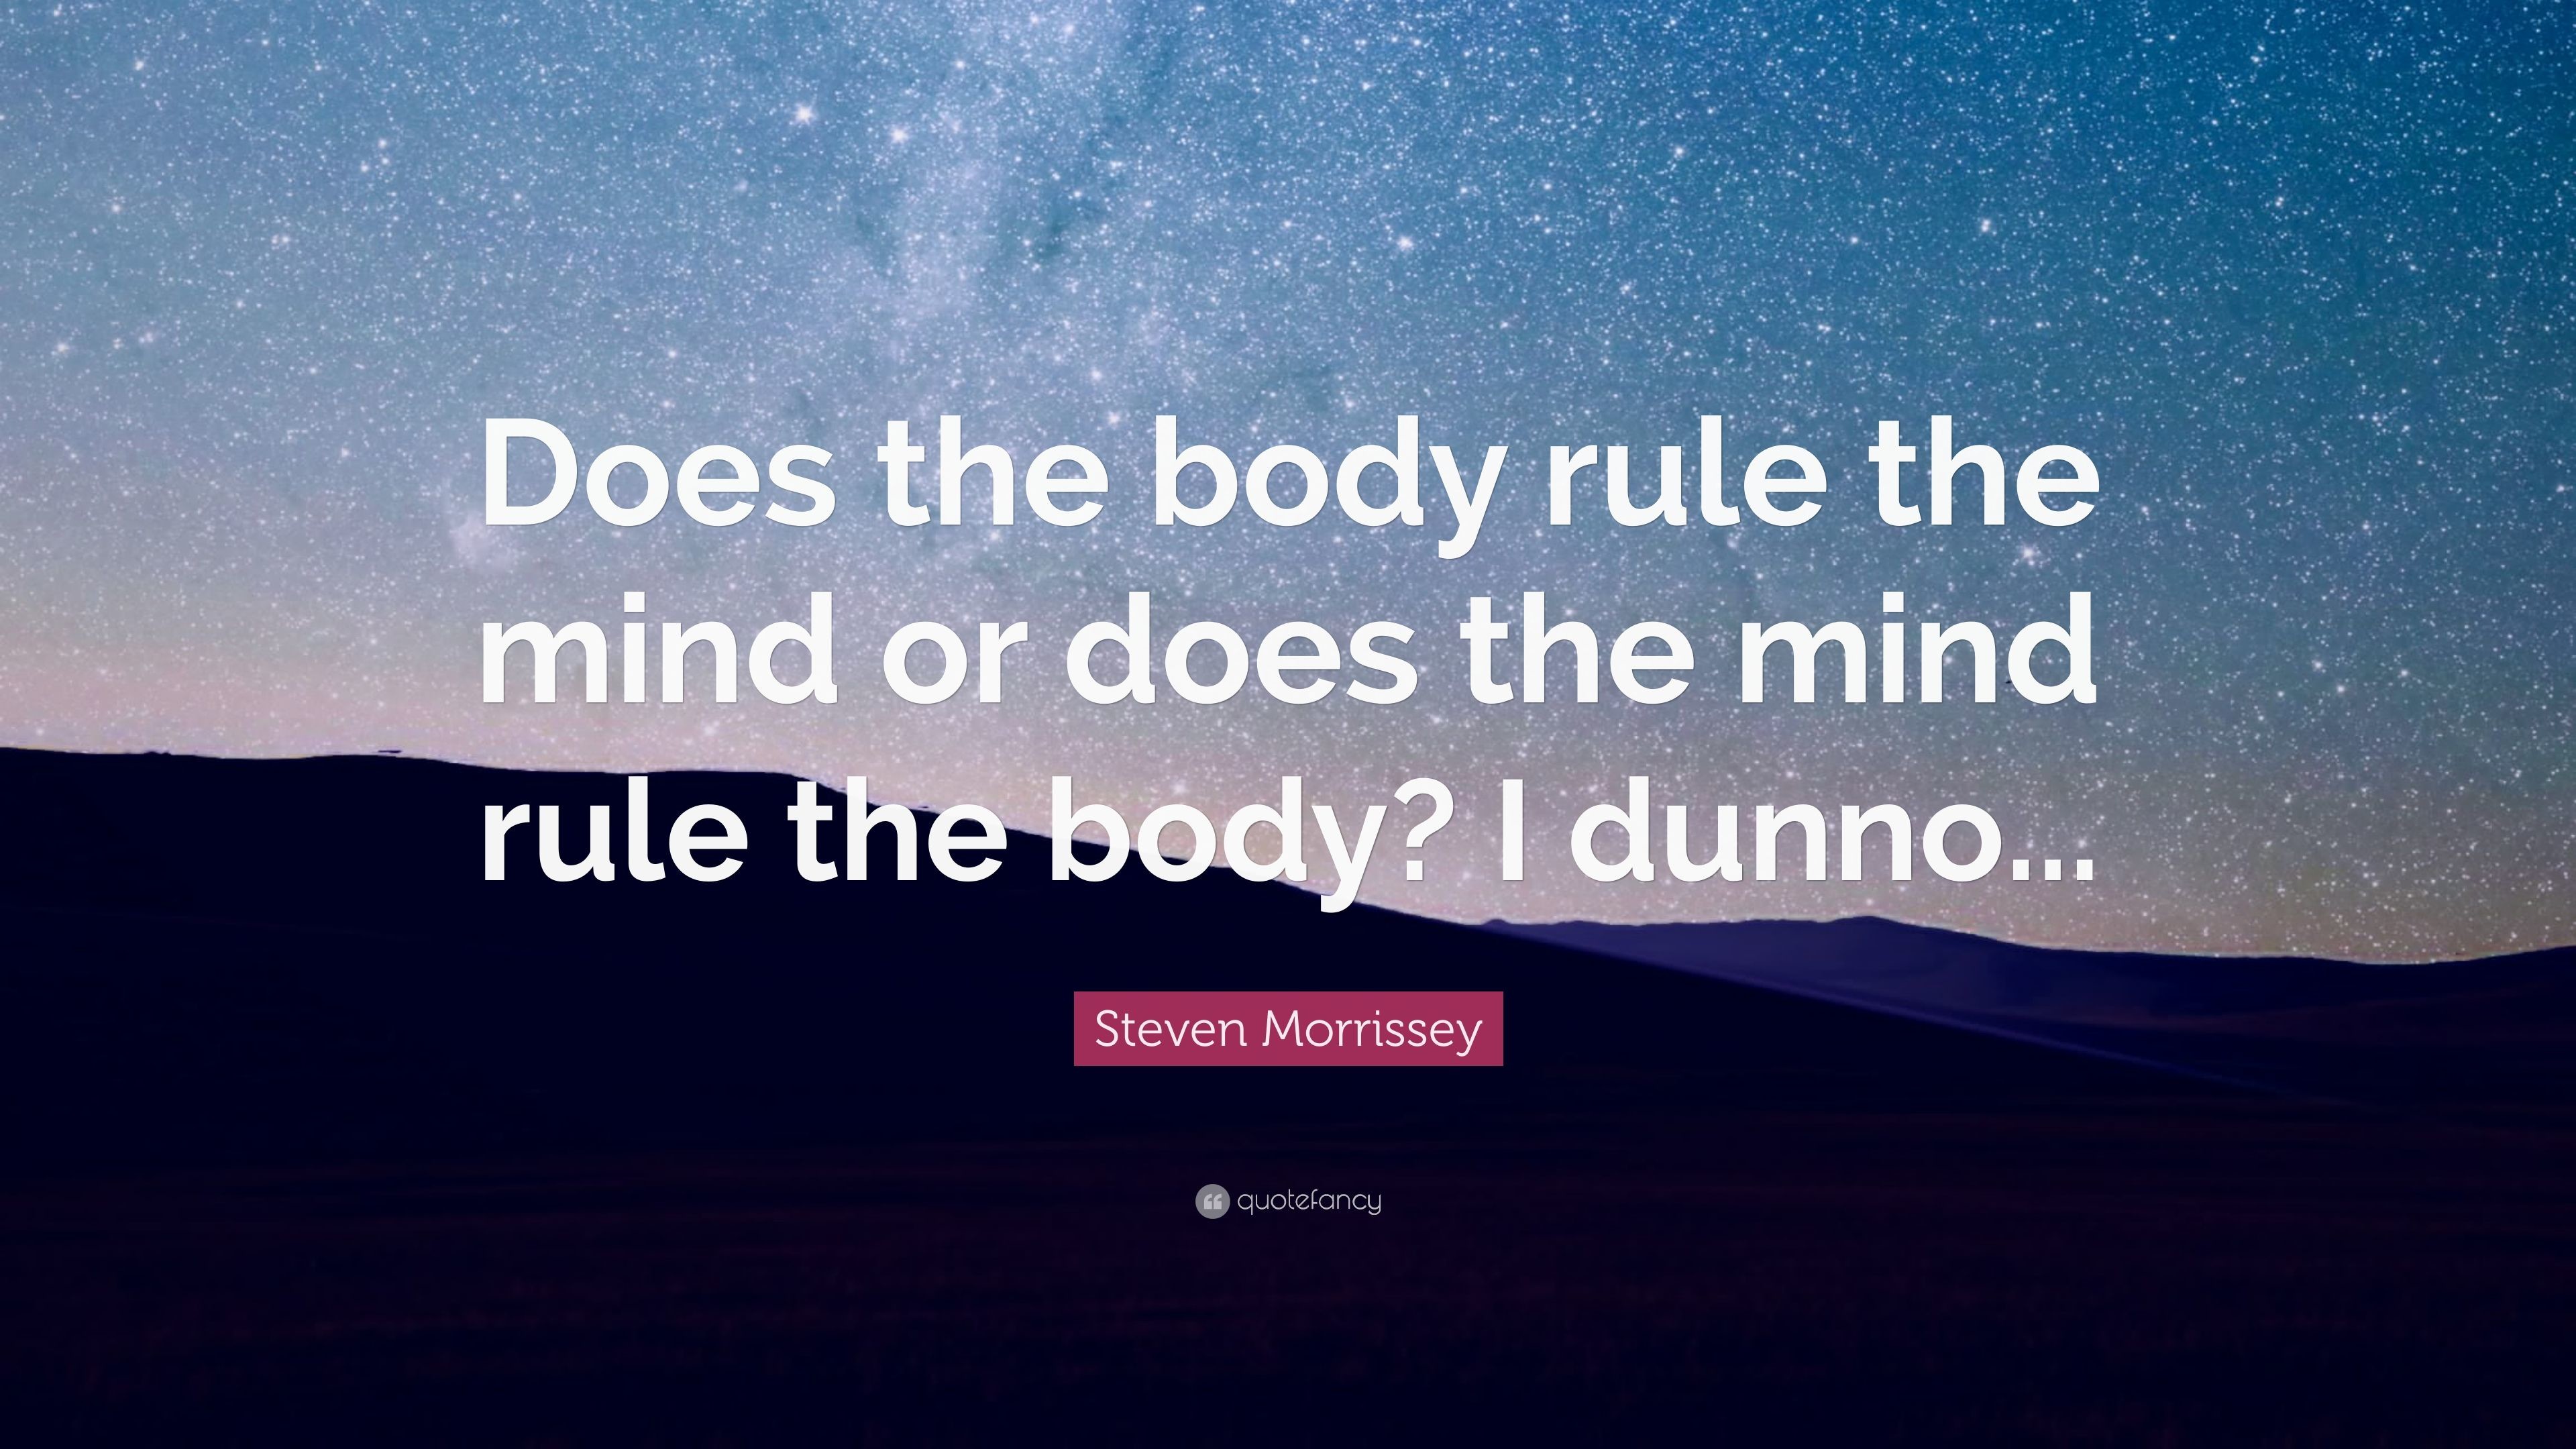 3840x2160 Steven Morrissey Quote: “Does the body rule the mind or does the mind rule